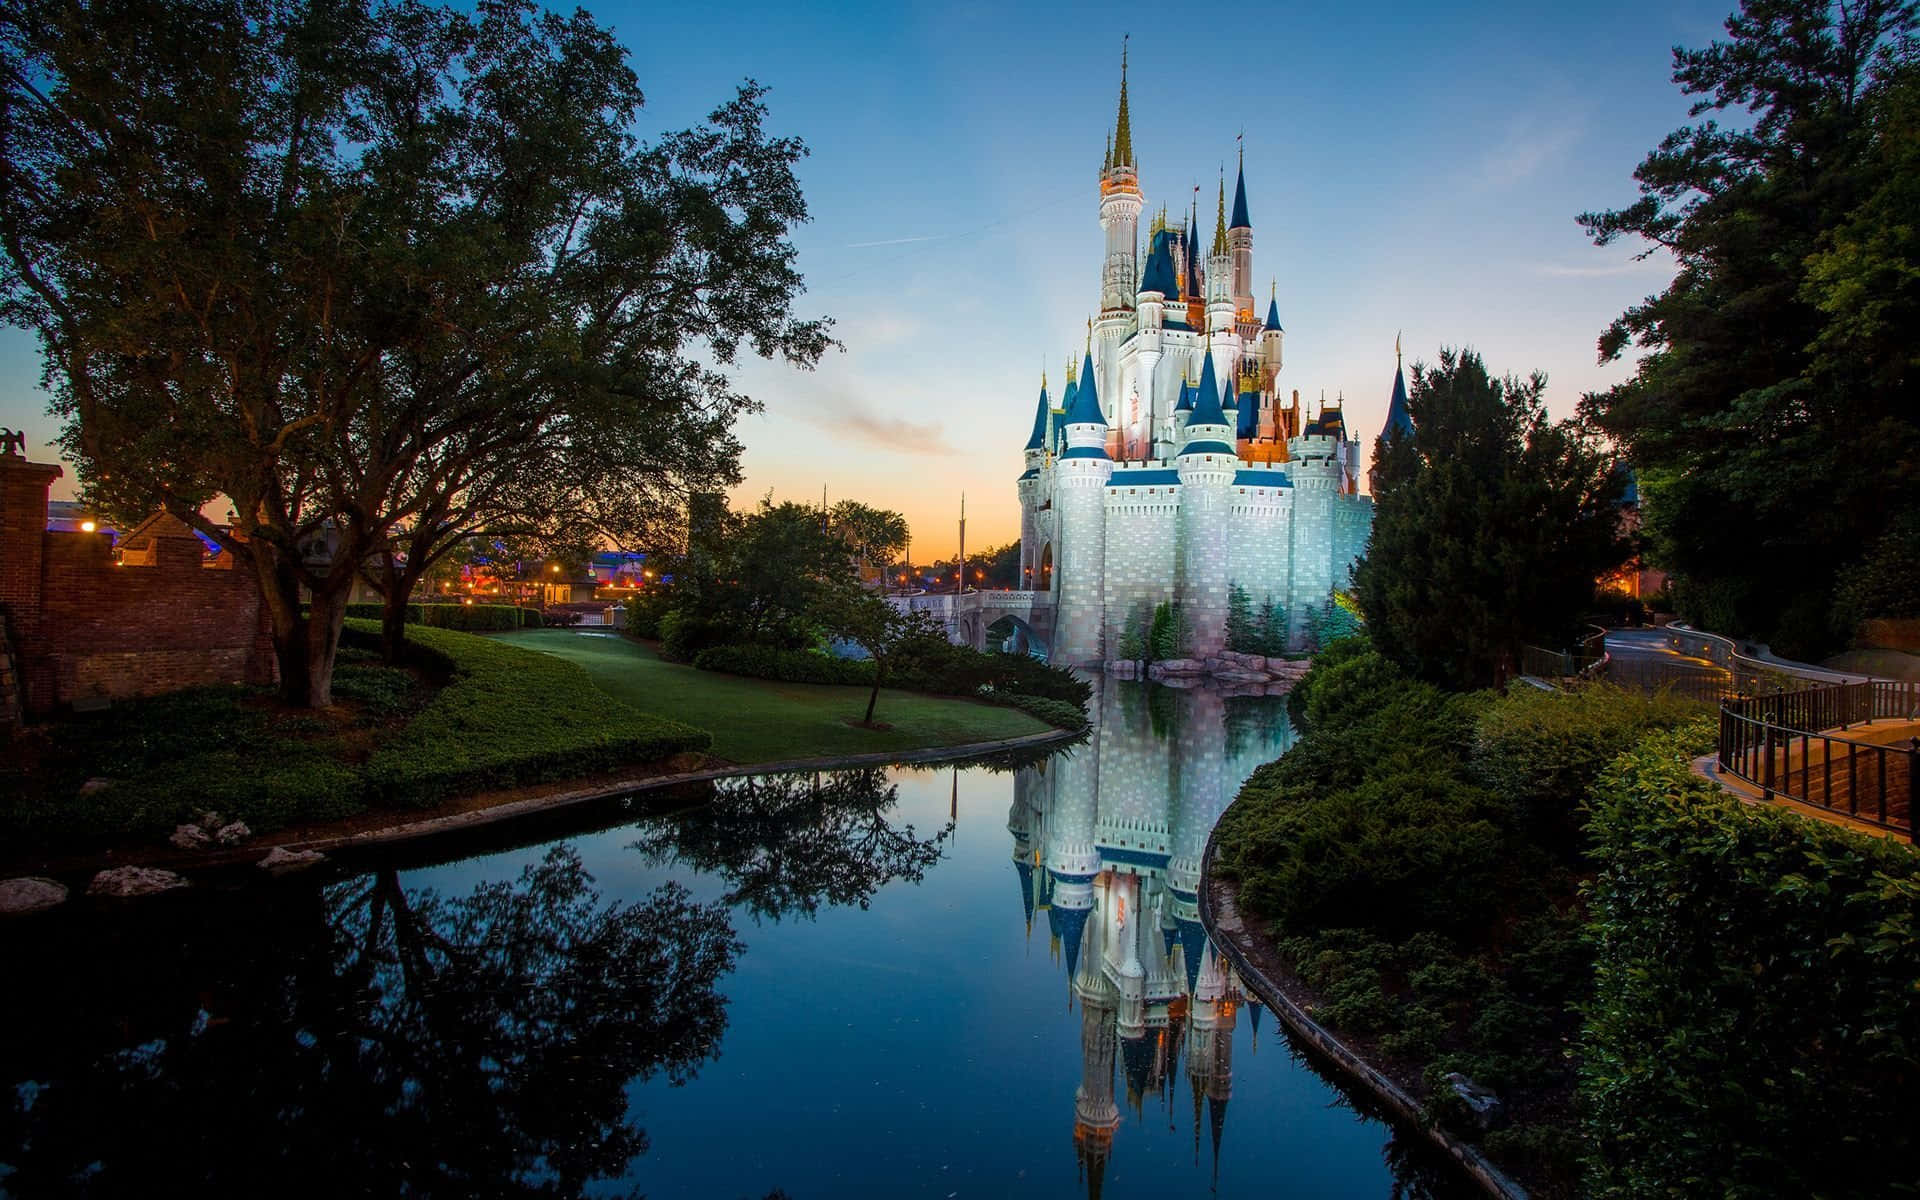 A Magical View of Disney Castle in the Night Sky